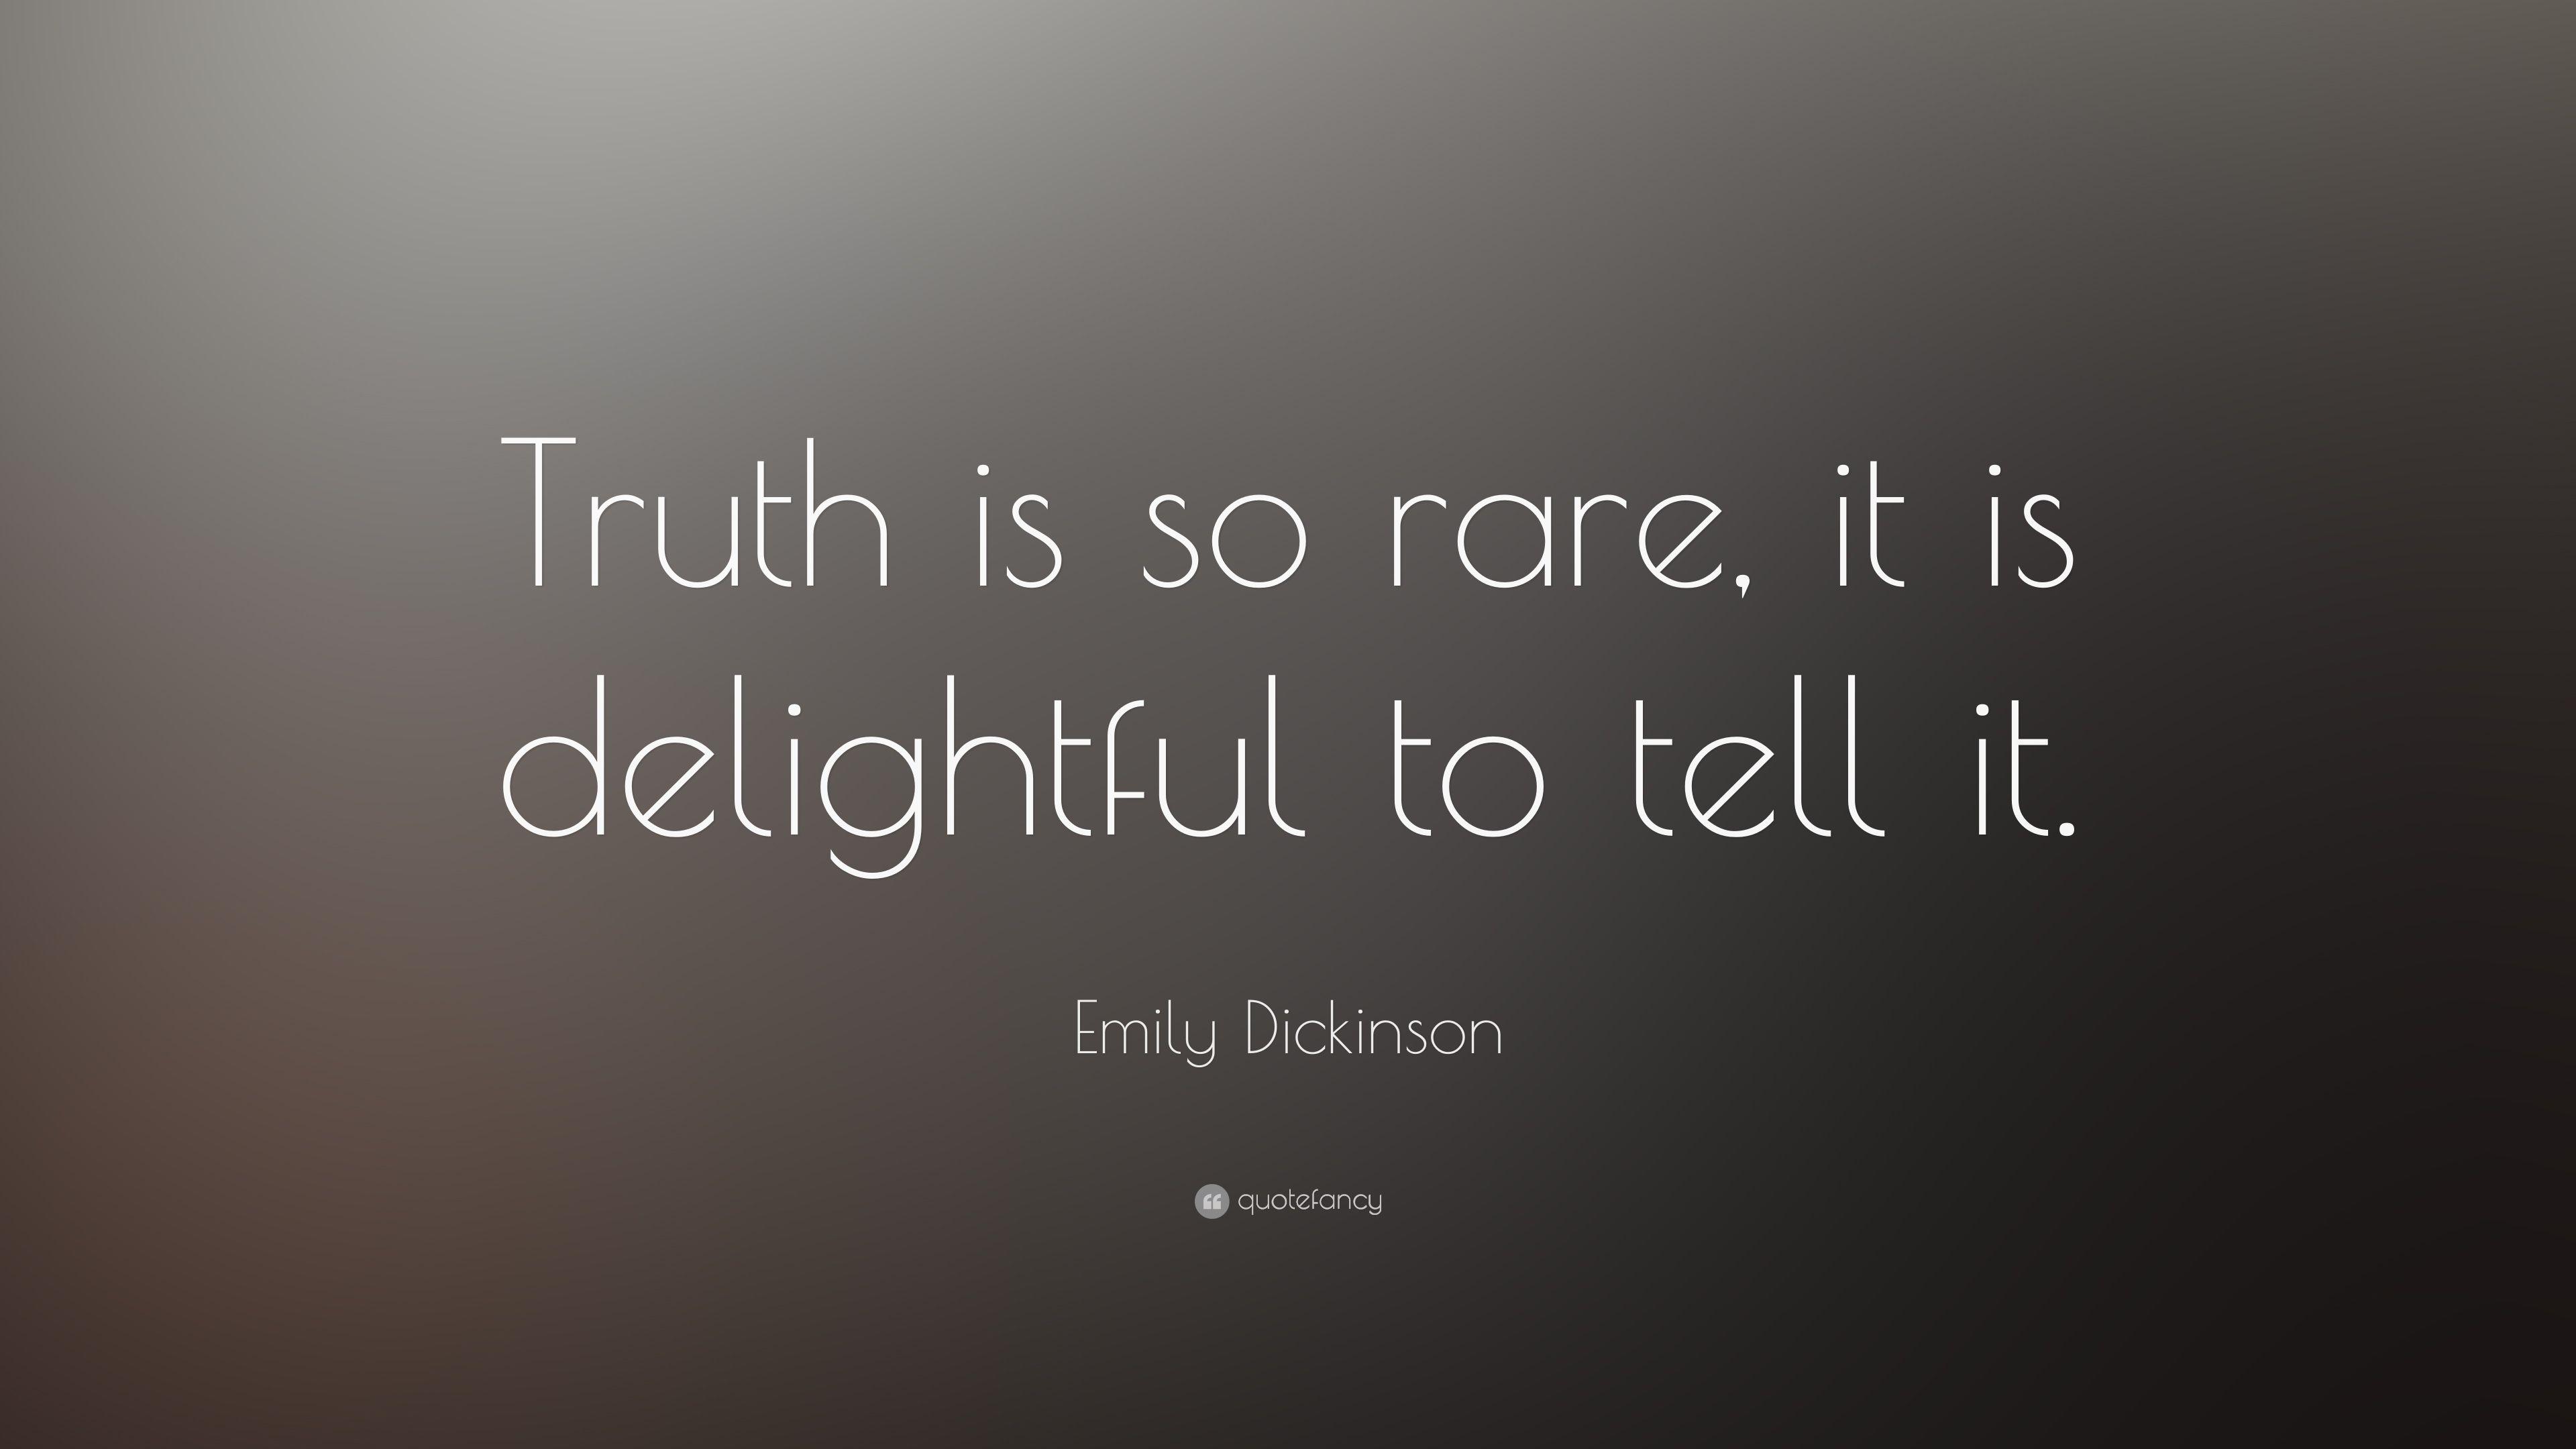 Emily Dickinson Quote: “Truth is so rare, it is delightful to tell